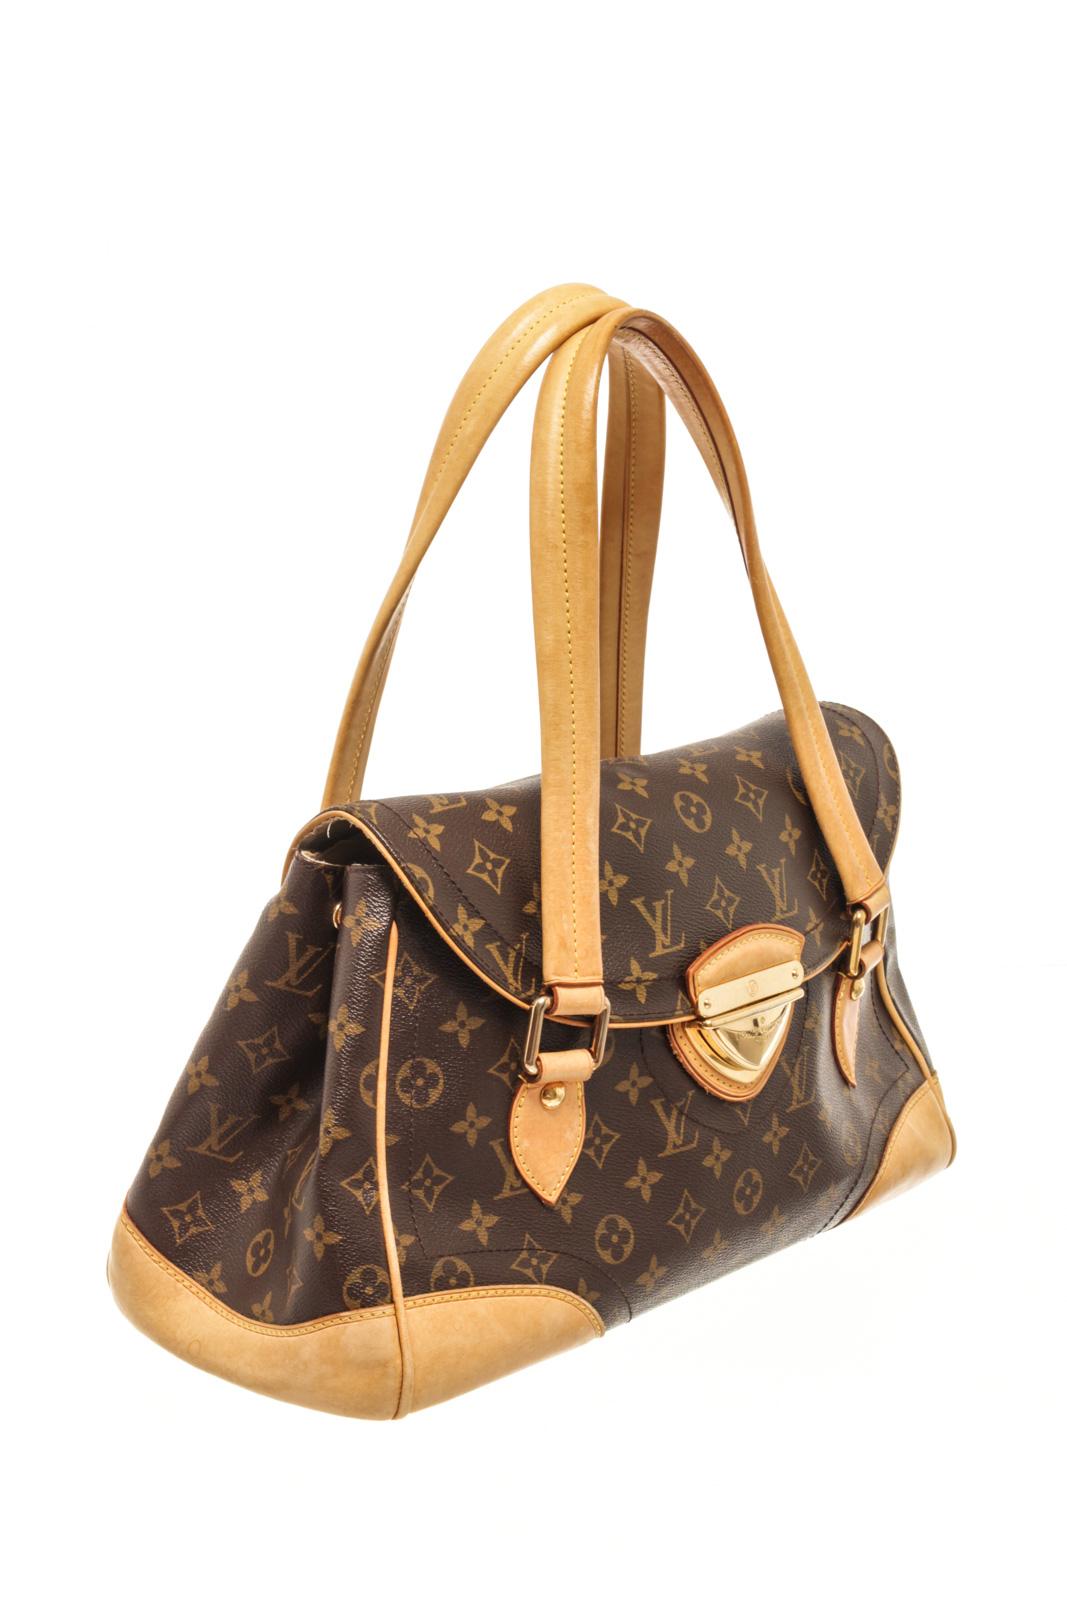 Louis Vuitton Brown Monogram Canvas Beverly GM Bag with vachetta leather shoulder strap, suede lining, two interior pockets, snap closure. There are some marking on the suede lining. Please refer to photos.

83414MSC